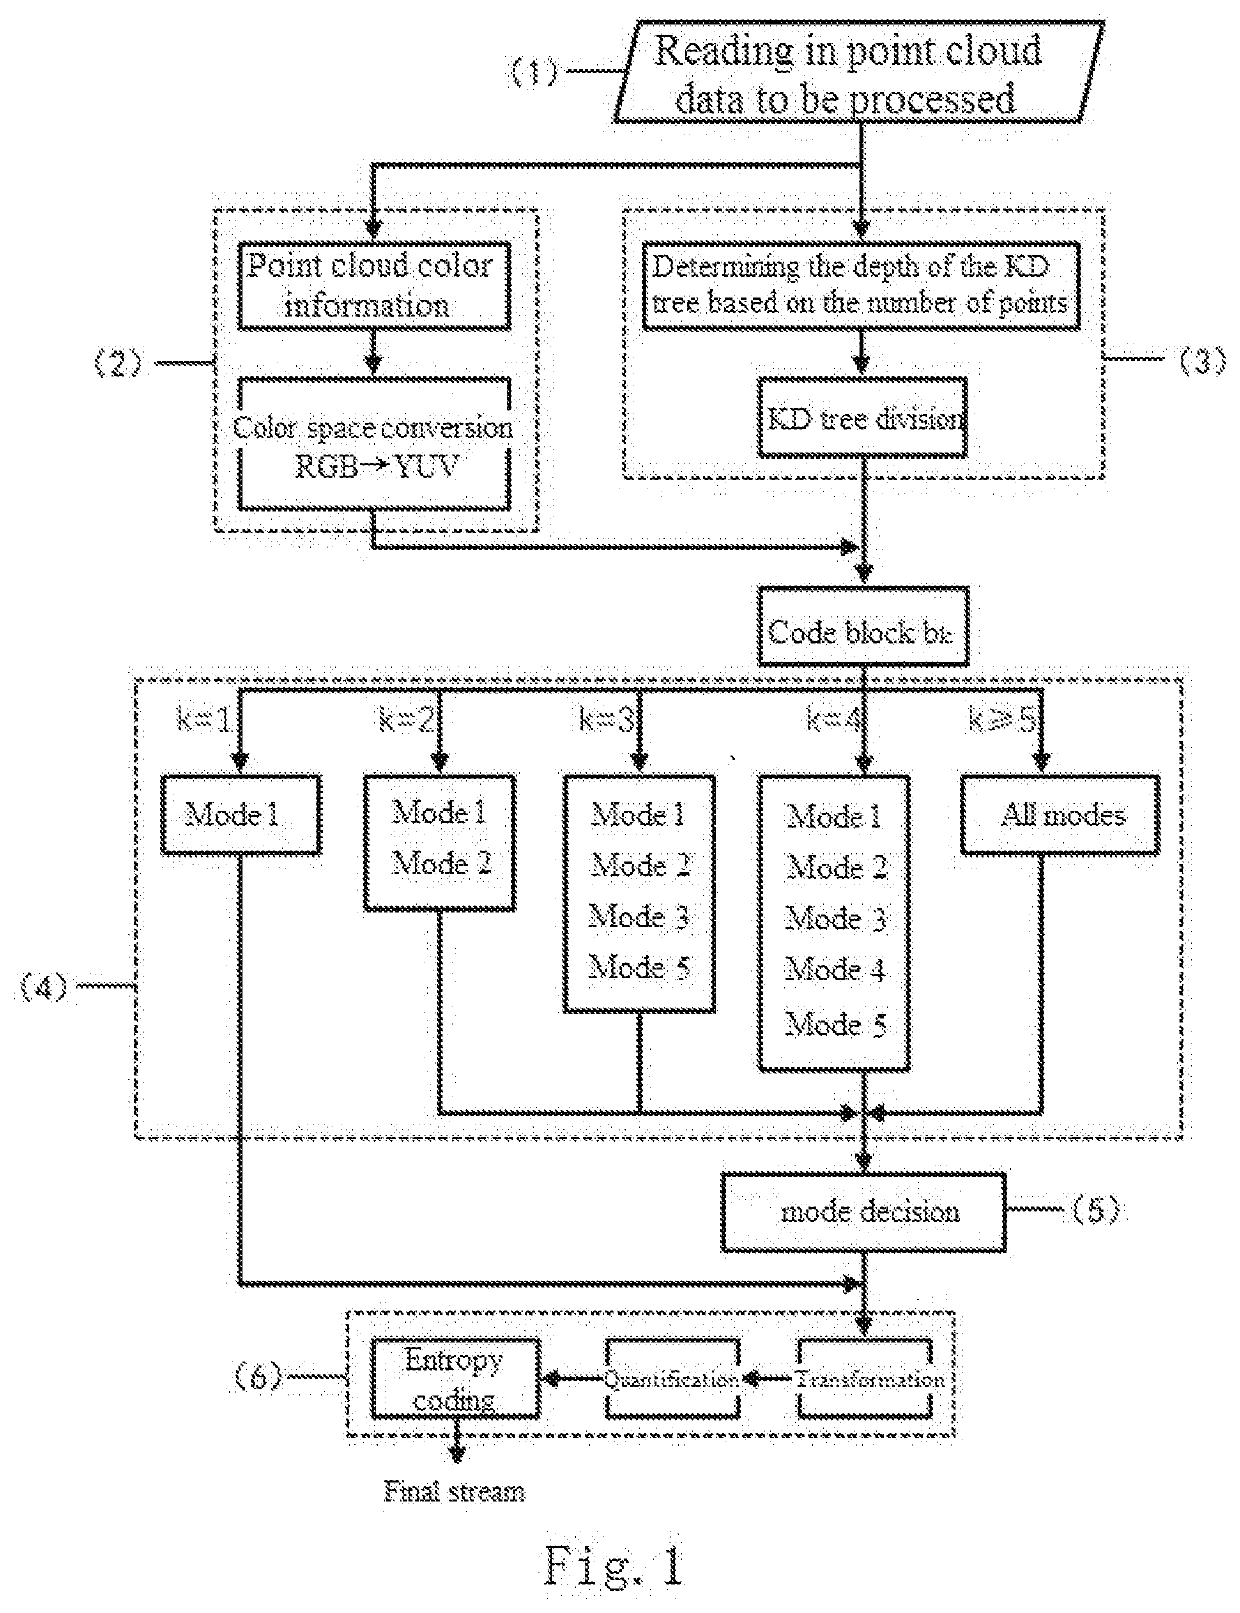 Multi-angle adaptive intra-frame prediction-based point cloud attribute compression method